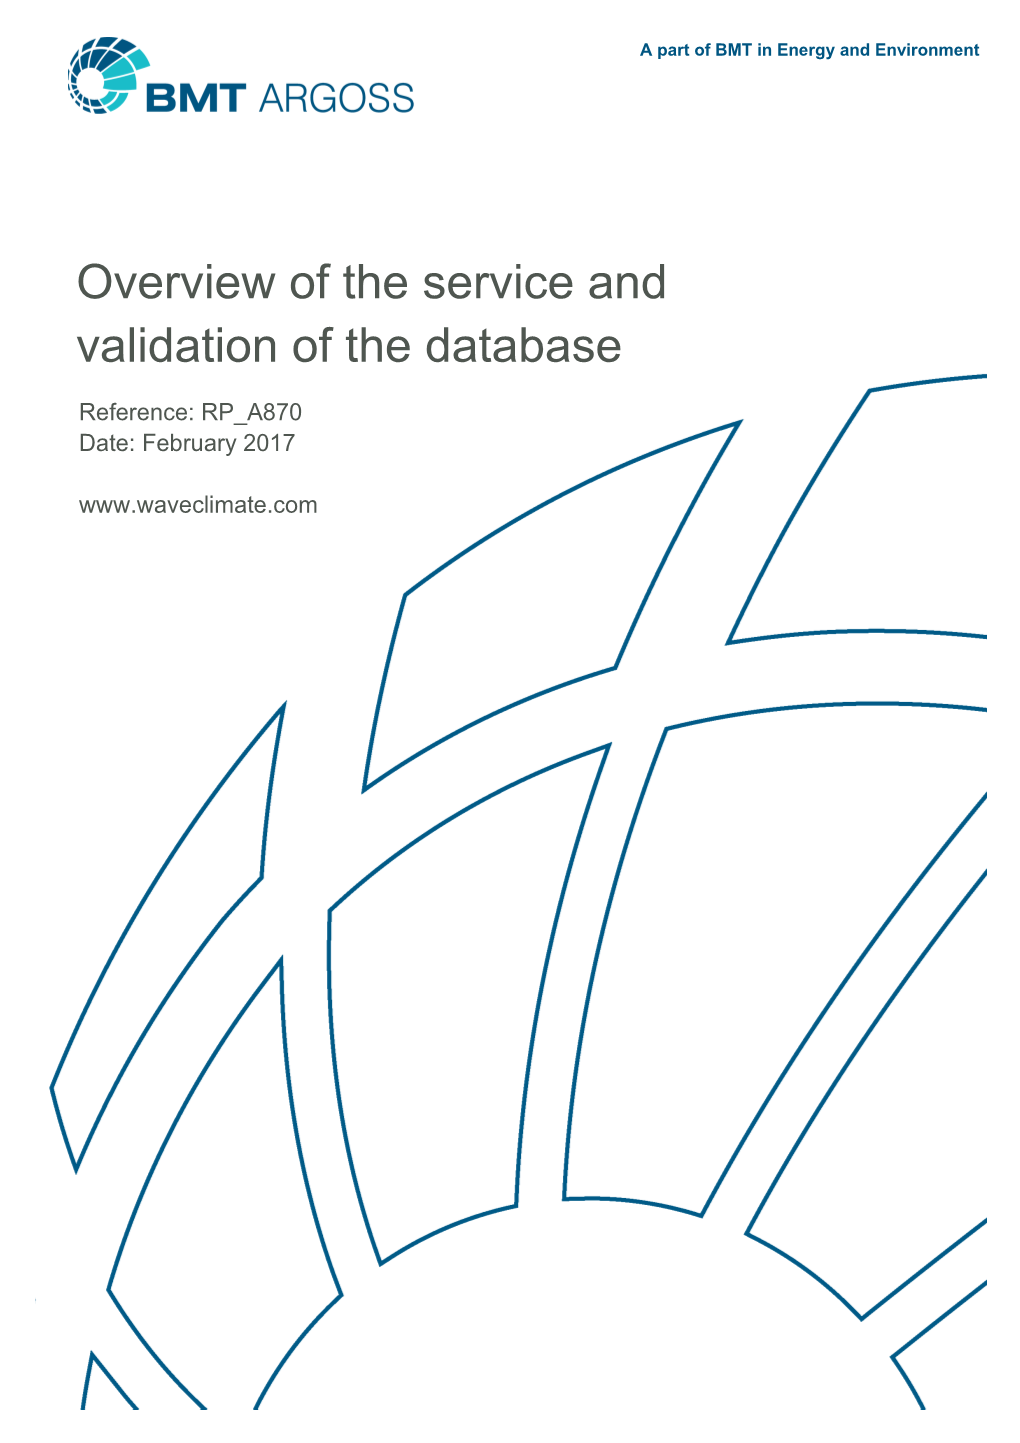 BMT Argossoverview of the Service and Validation of the Database